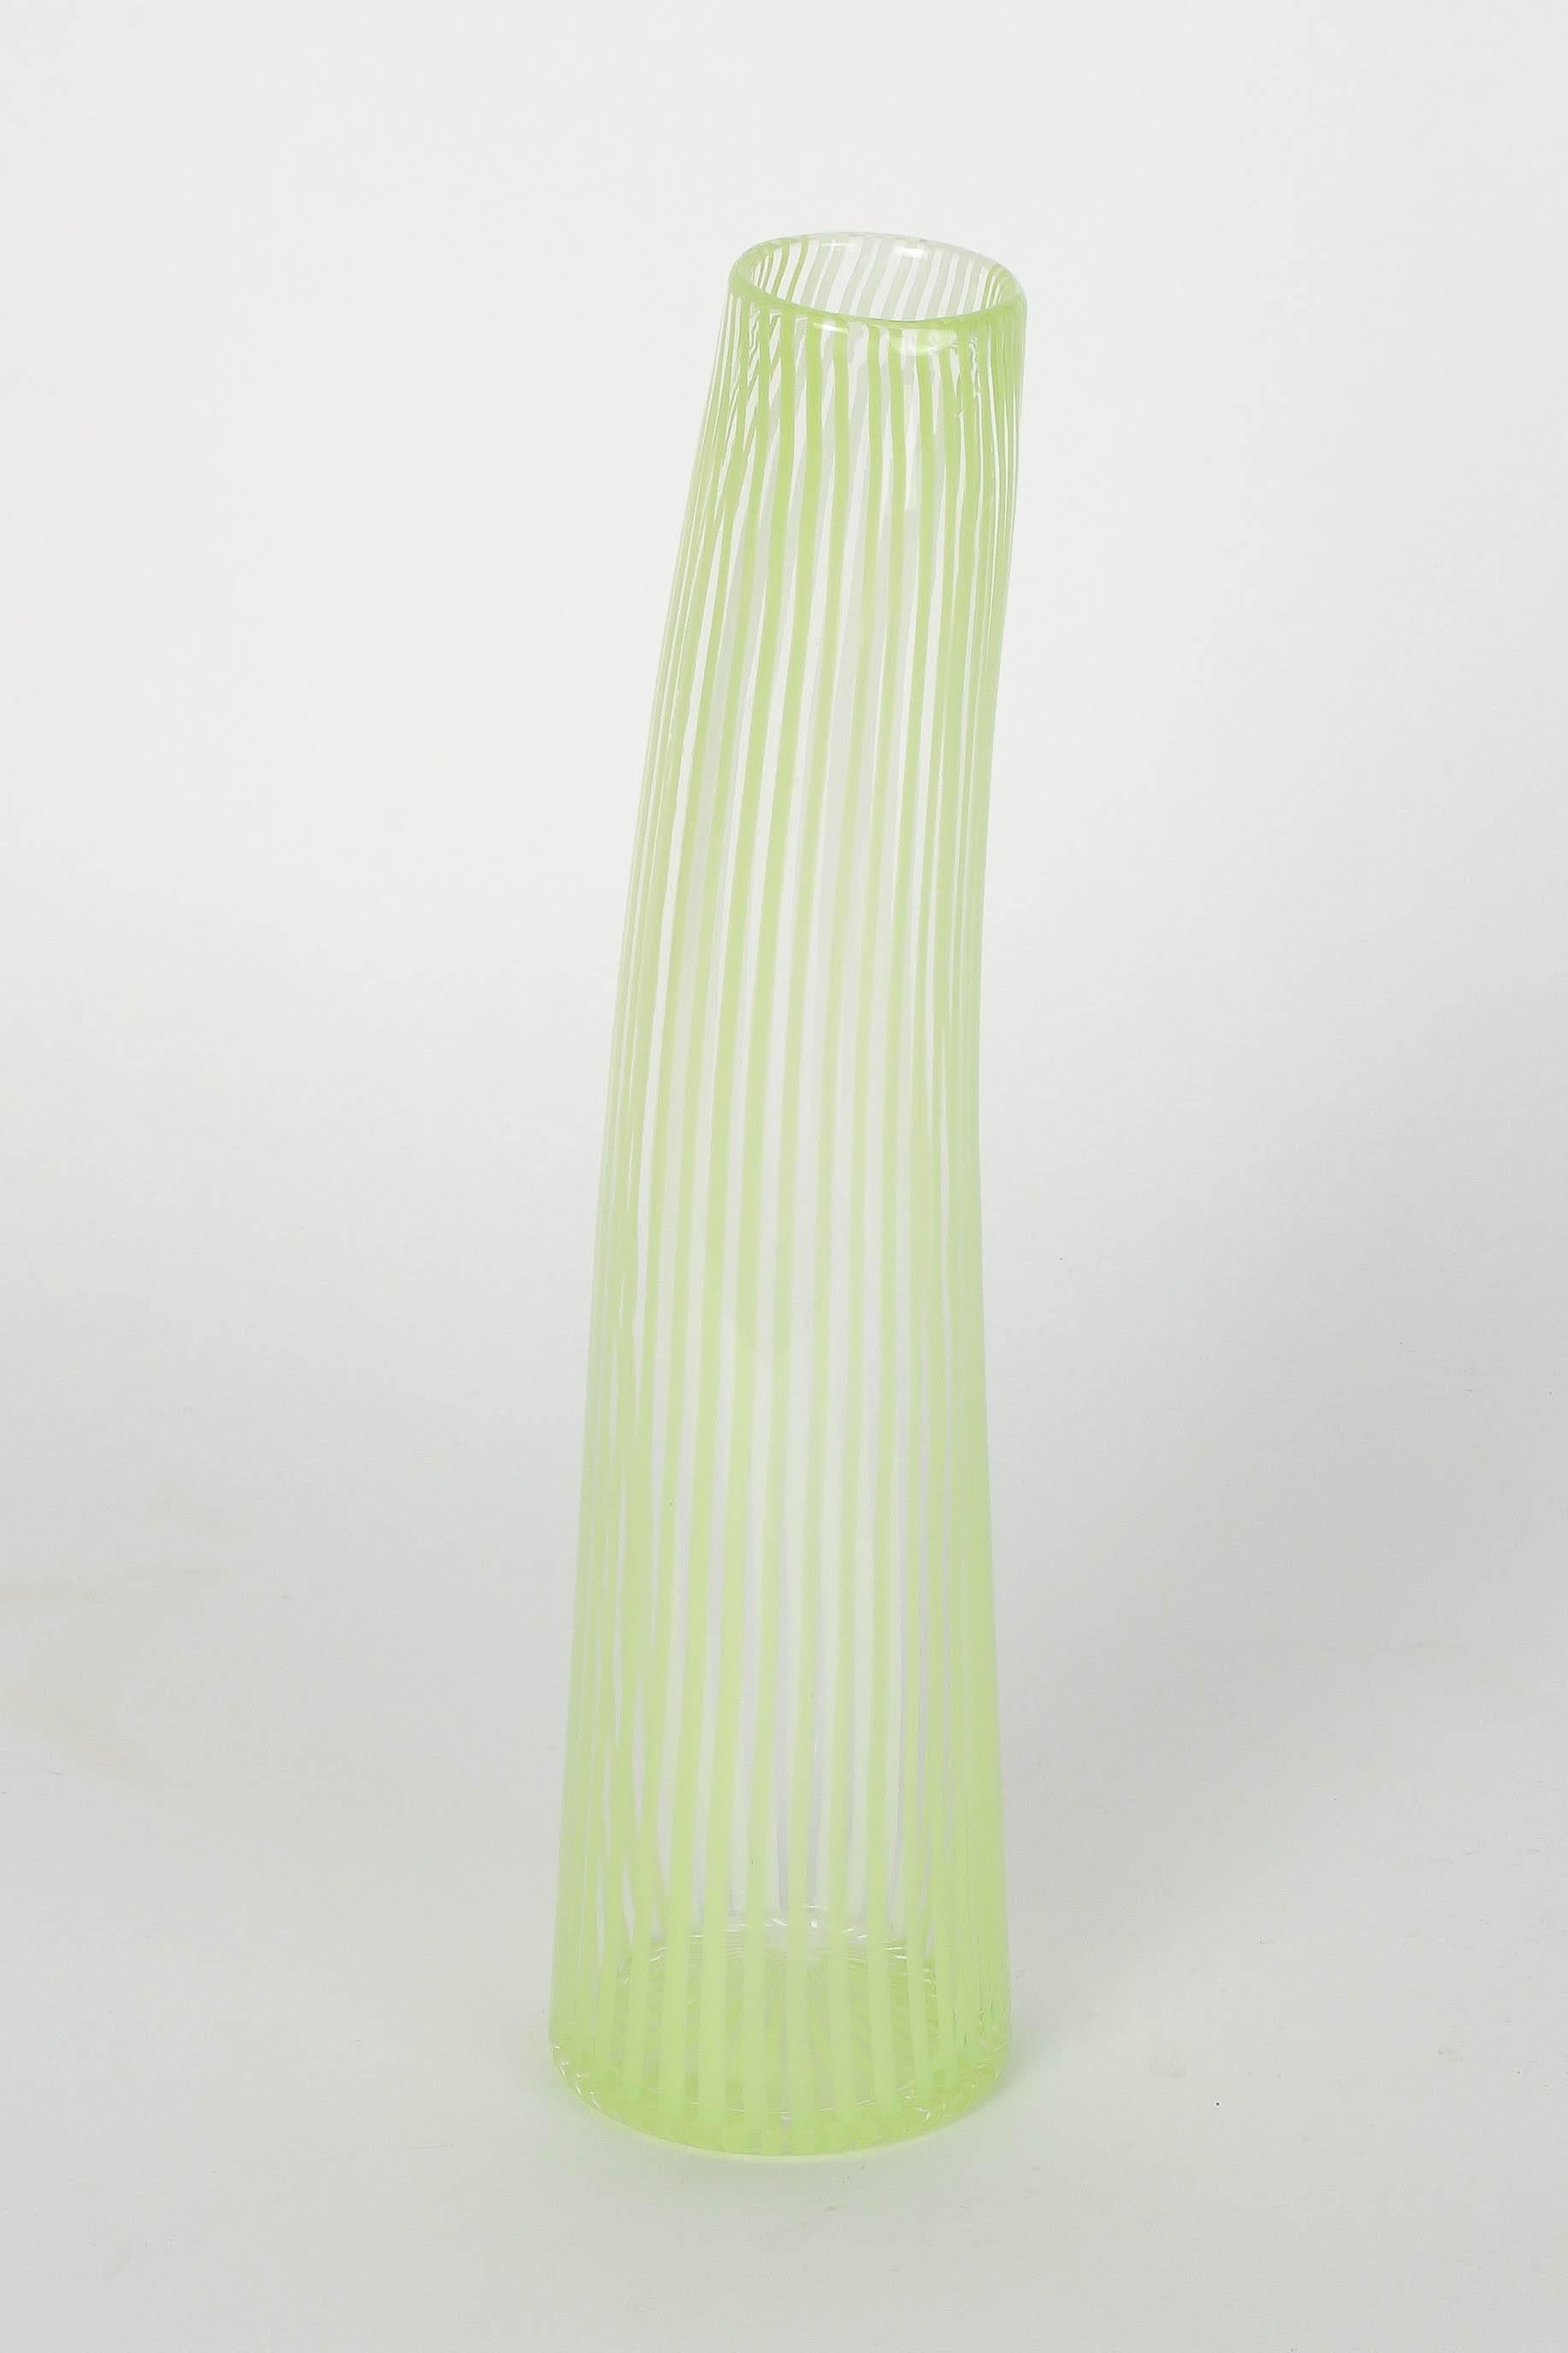 Wonderful Dino Martens filigrana vase with fine yellowish green and white stripes. Slightly curved, polished pontil mark. Not signed.
Height: 31.5 cm.
Diameter base: 7.5 cm.
Diameter opening: 4.5 cm.